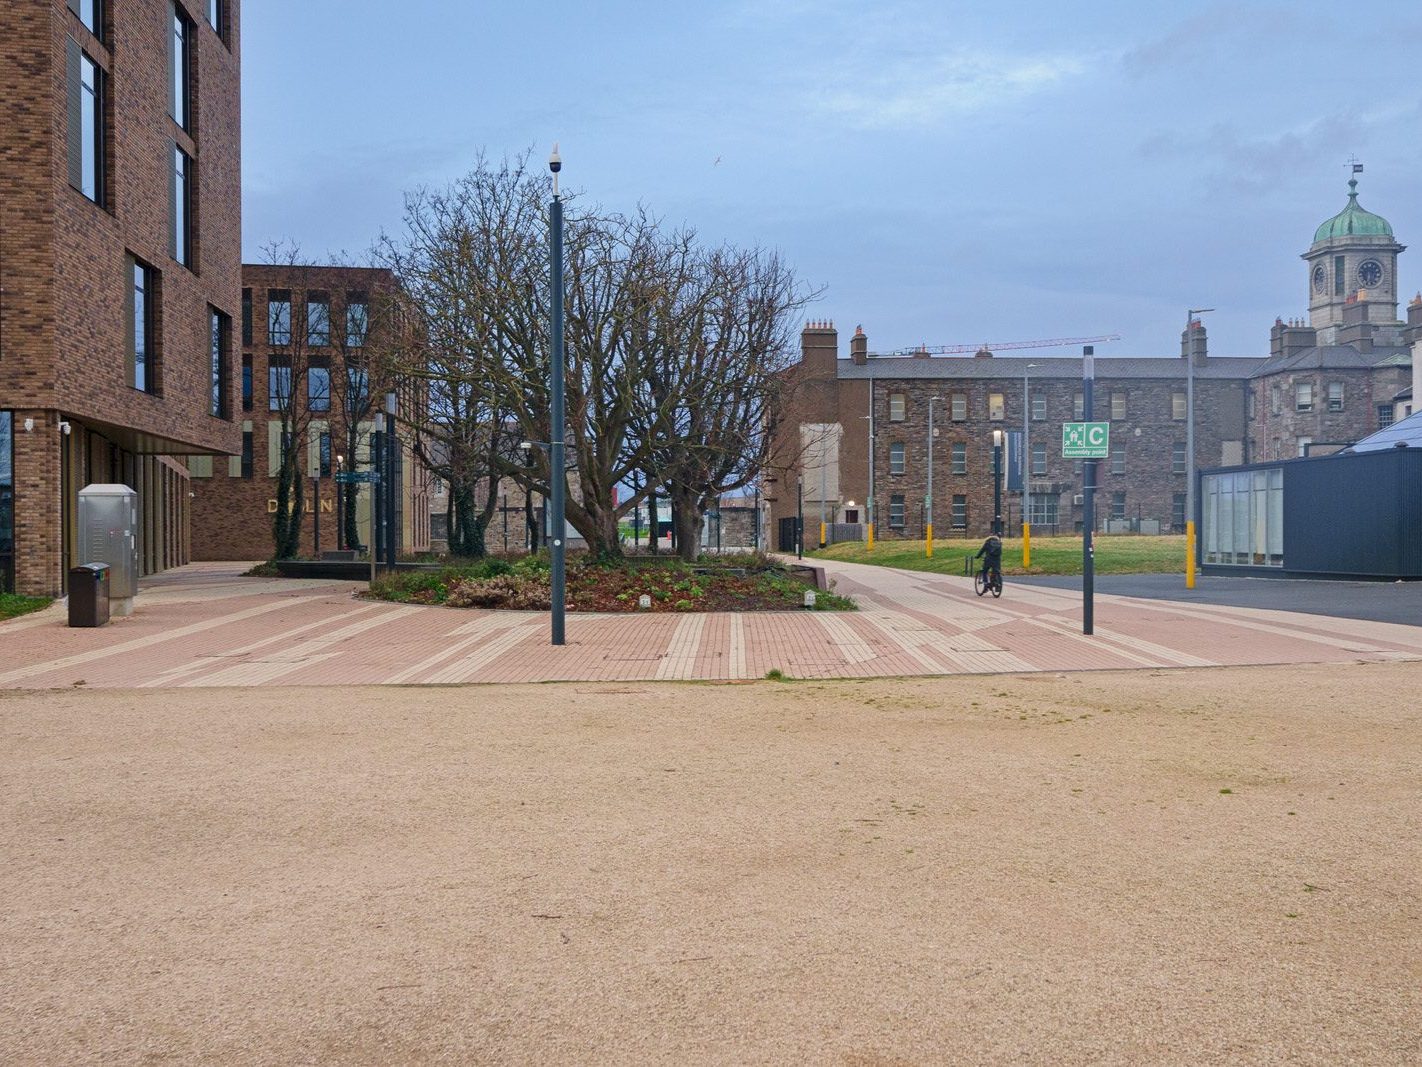 I VISITED THE GRANGEGORMAN UNIVERSITY CAMPUS [THERE WAS NO SIGN OF CHRISTMAS CELEBRATIONS THERE]-226028-1